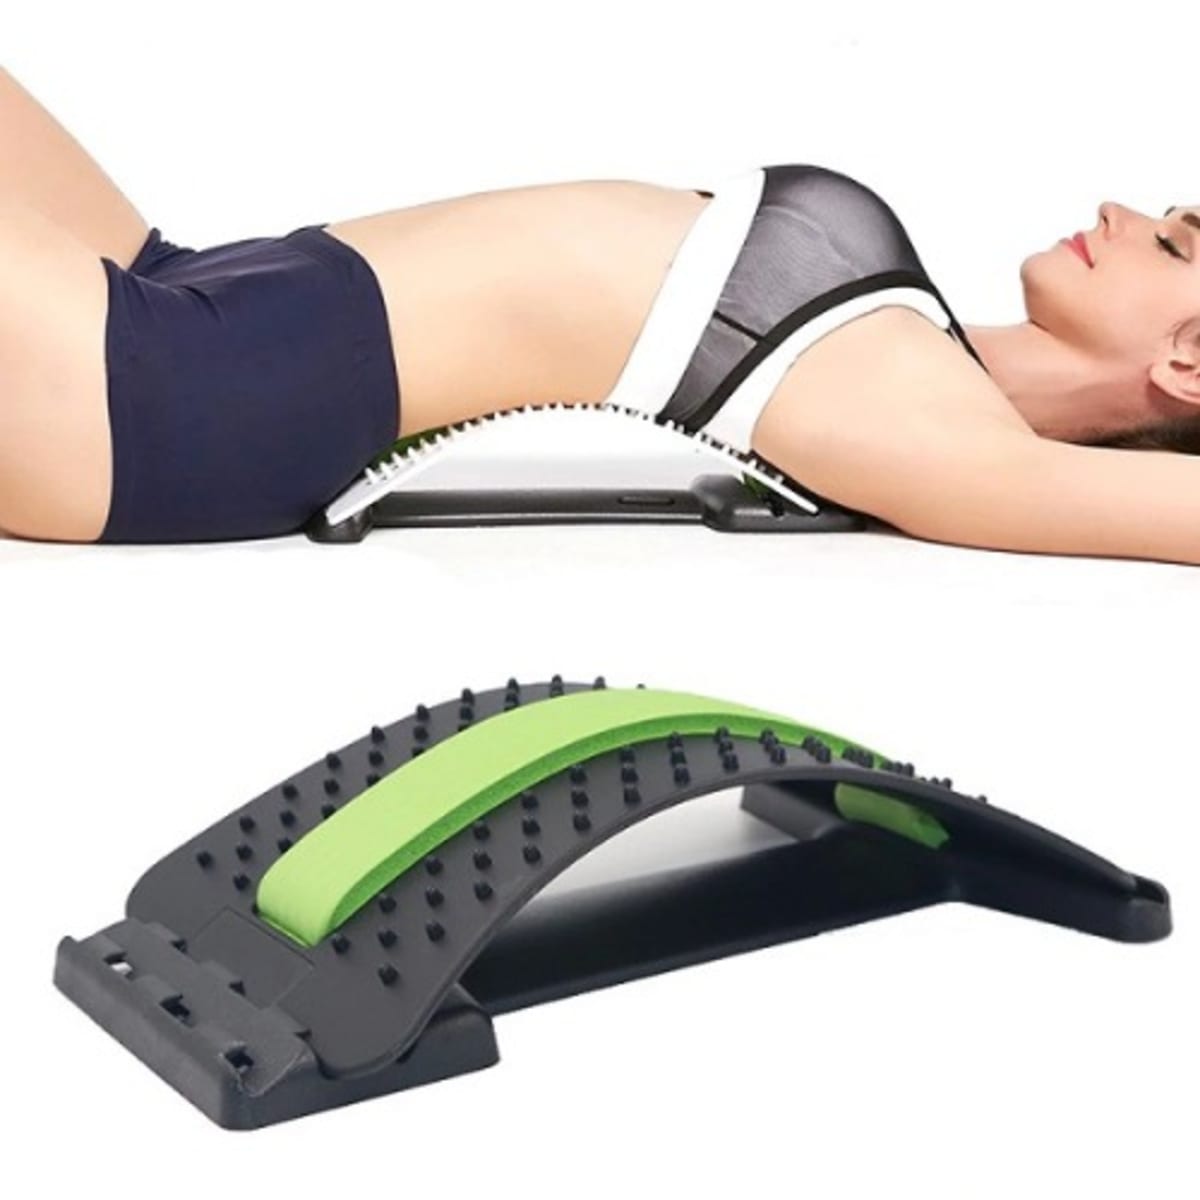 Lumbar Relief Back Stretcher Device Back Support - Black+green